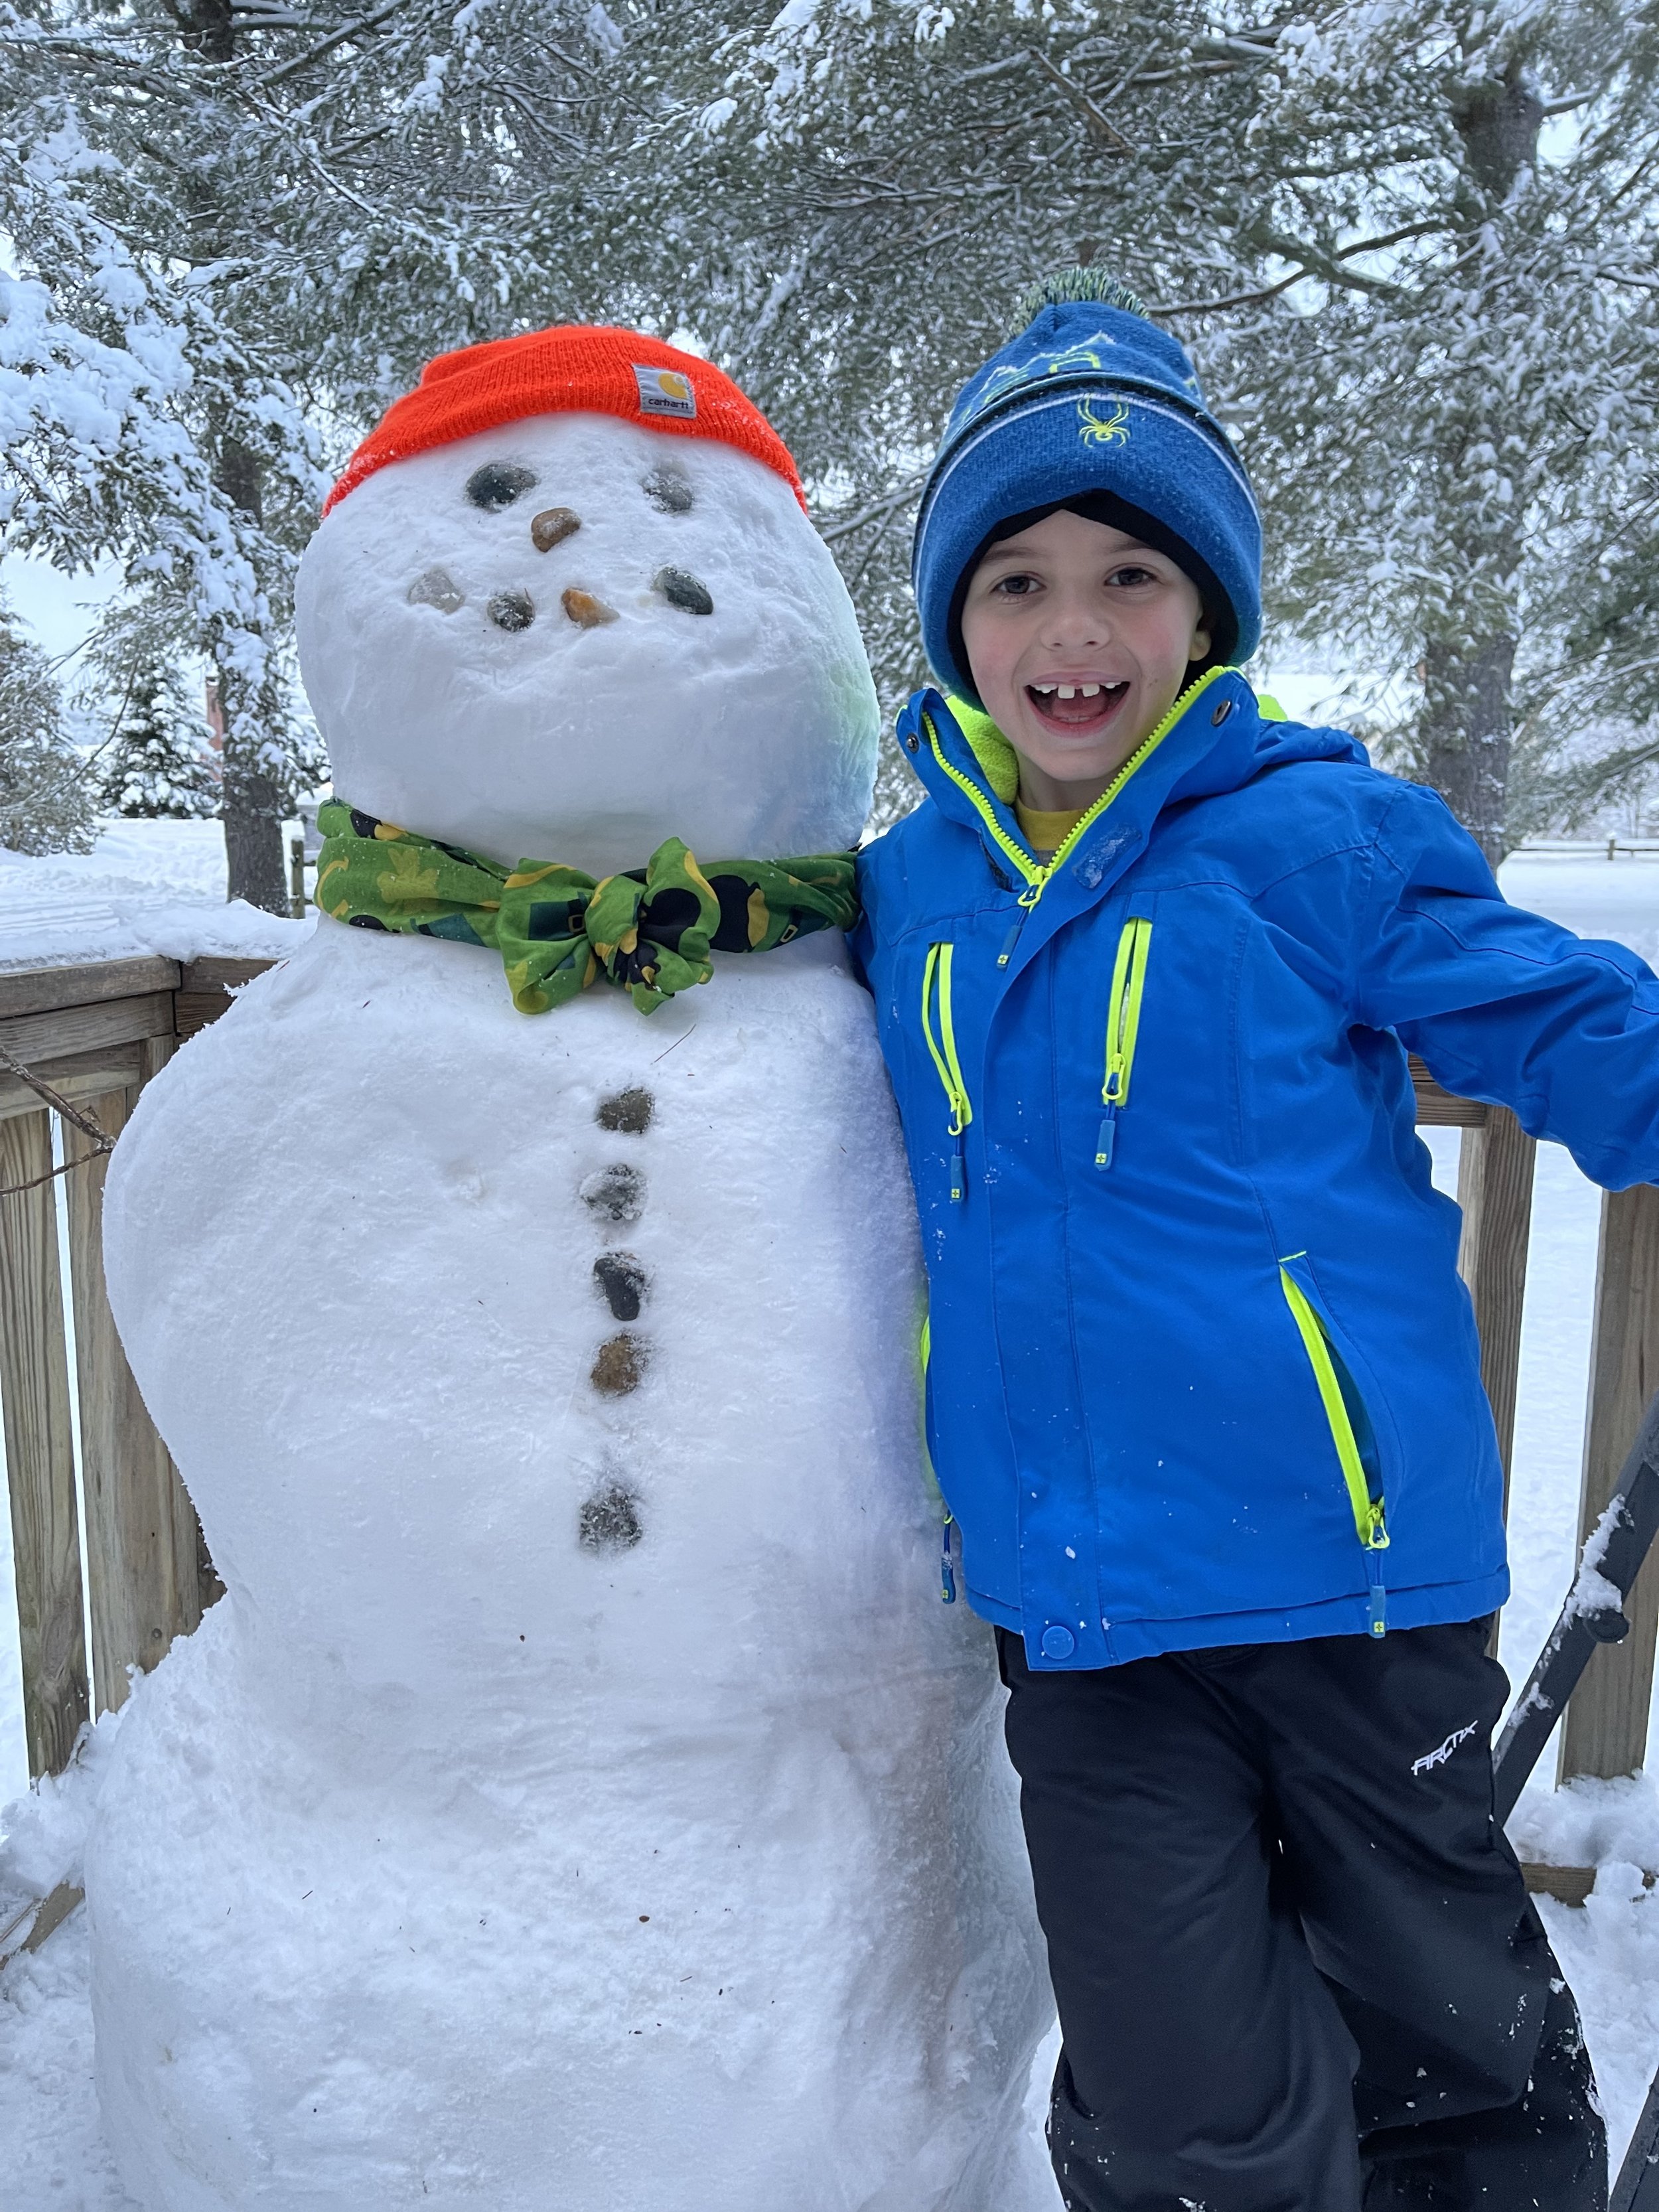   Why shovel the porch when you could build a snowman on it instead? Jaxon in Stowe chose the latter. Photo by Nikki Kennedy  